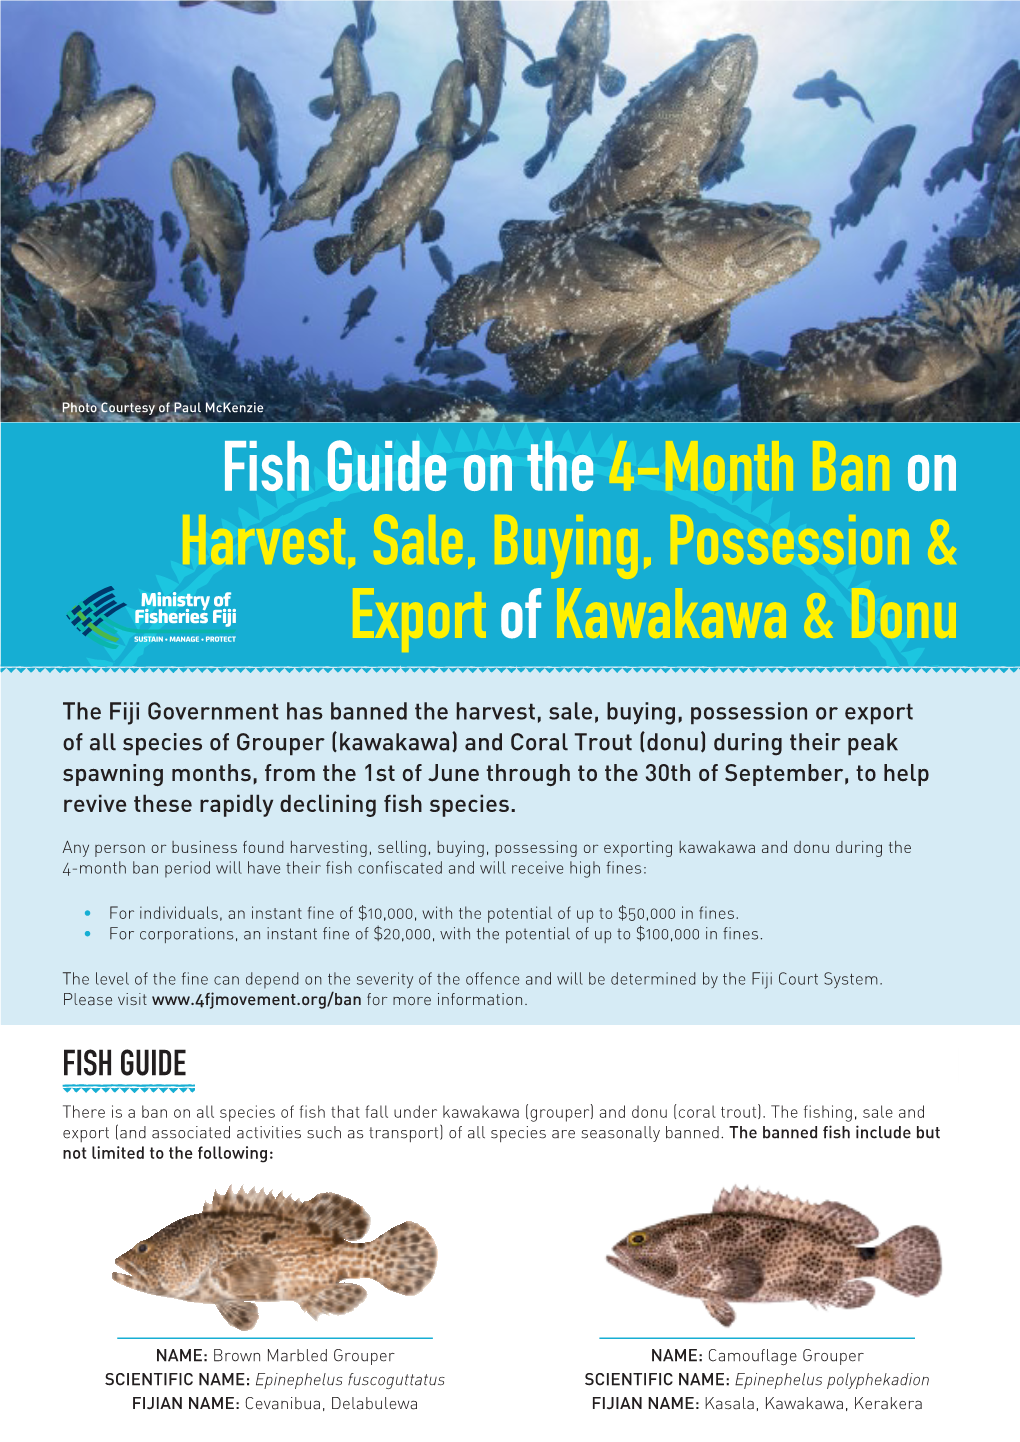 Fish Guide on the 4-Month Banon Harvest, Sale, Buying, Possession